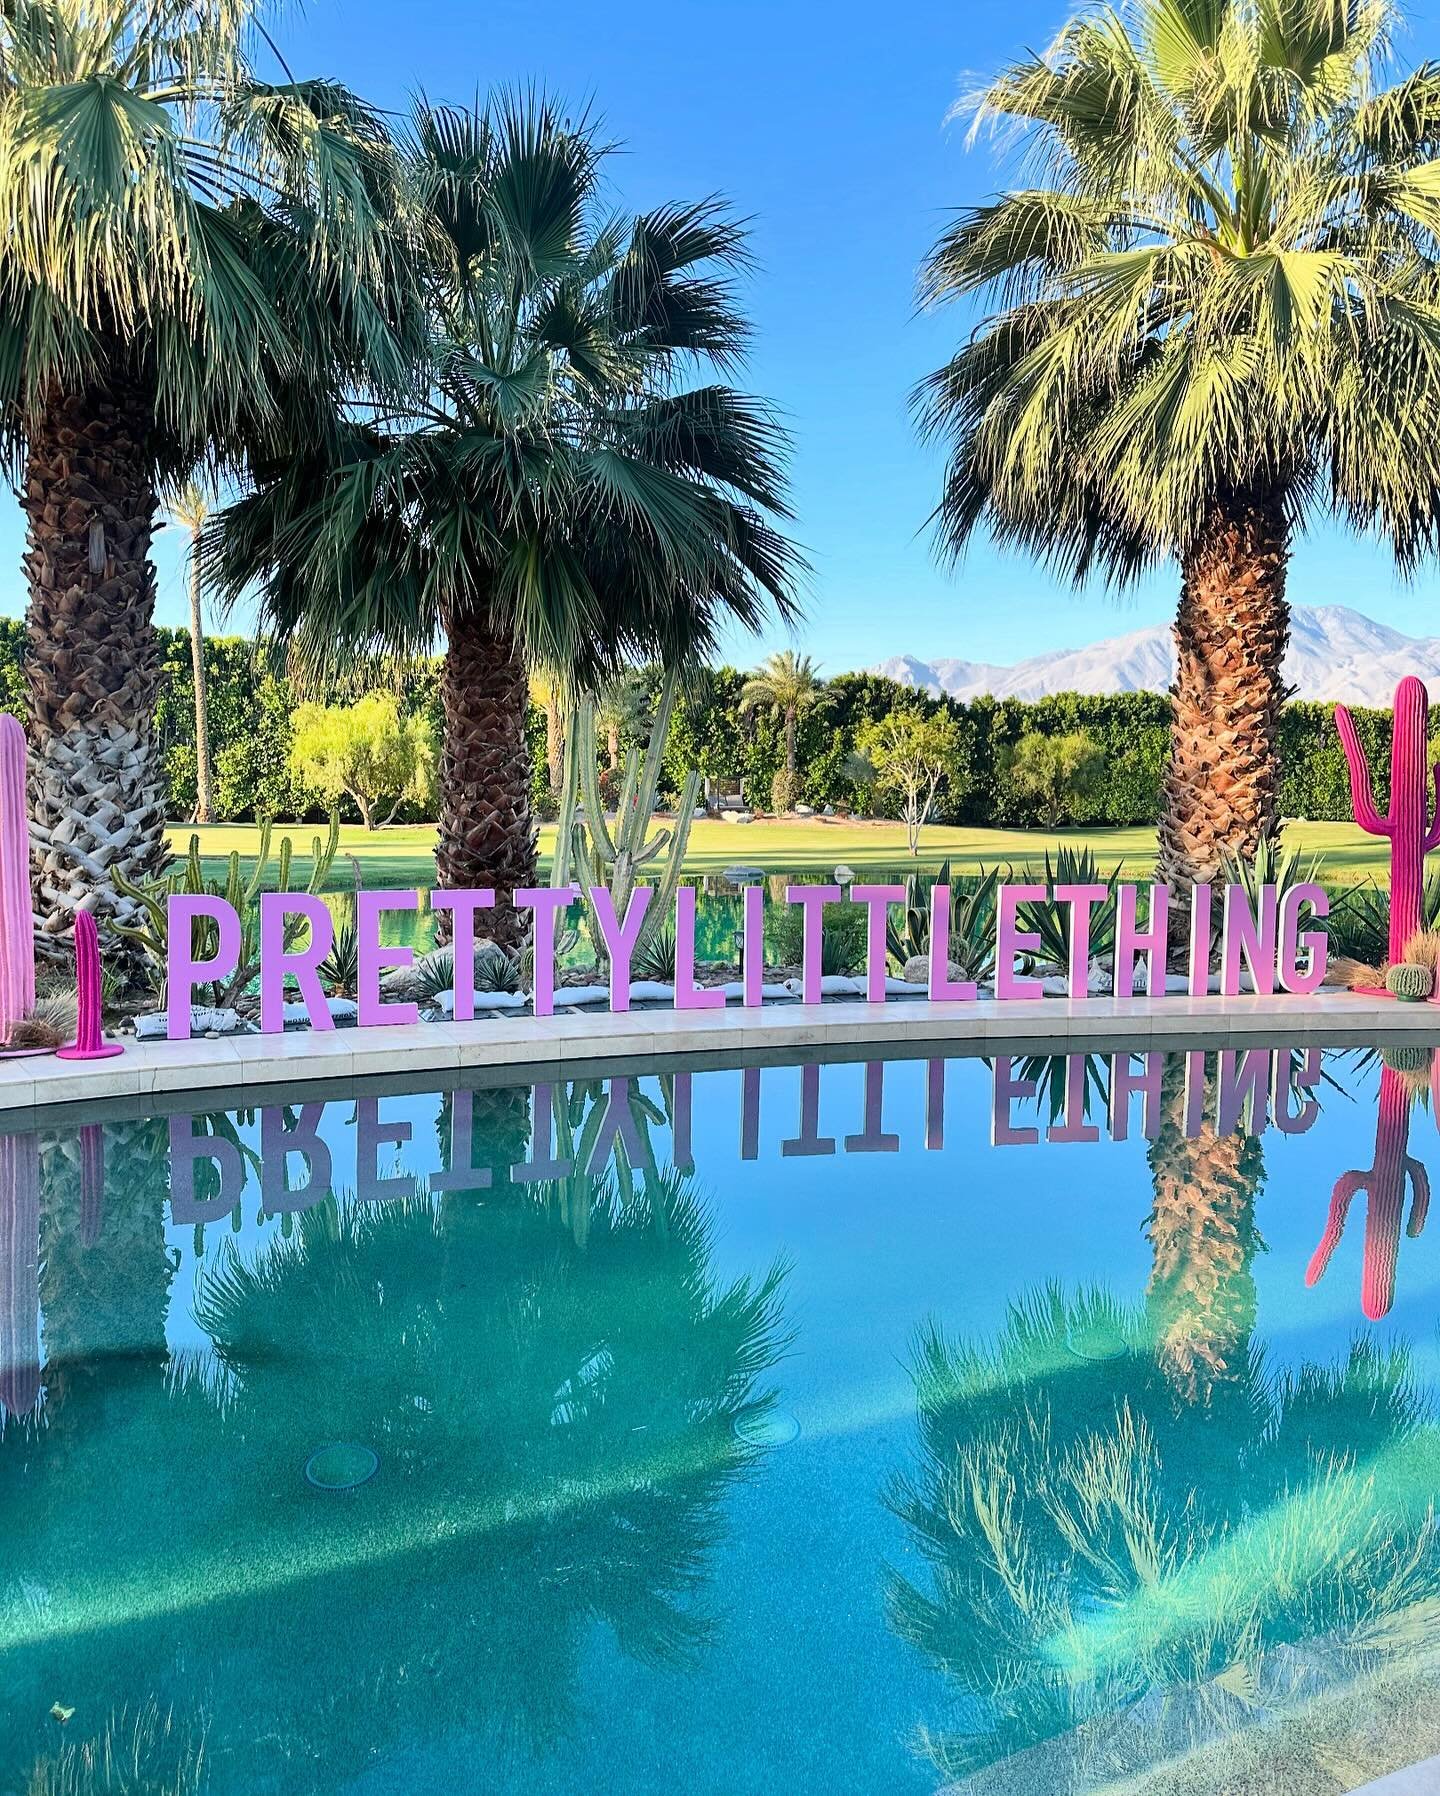 Poolsides deserve to be pretty, especially for @prettylittlething on Stagecoach weekend!

#thewotp #wifeoftheparty #stagecoach #fabrication #branding #eventdesign #eventfabrication #poolfloat